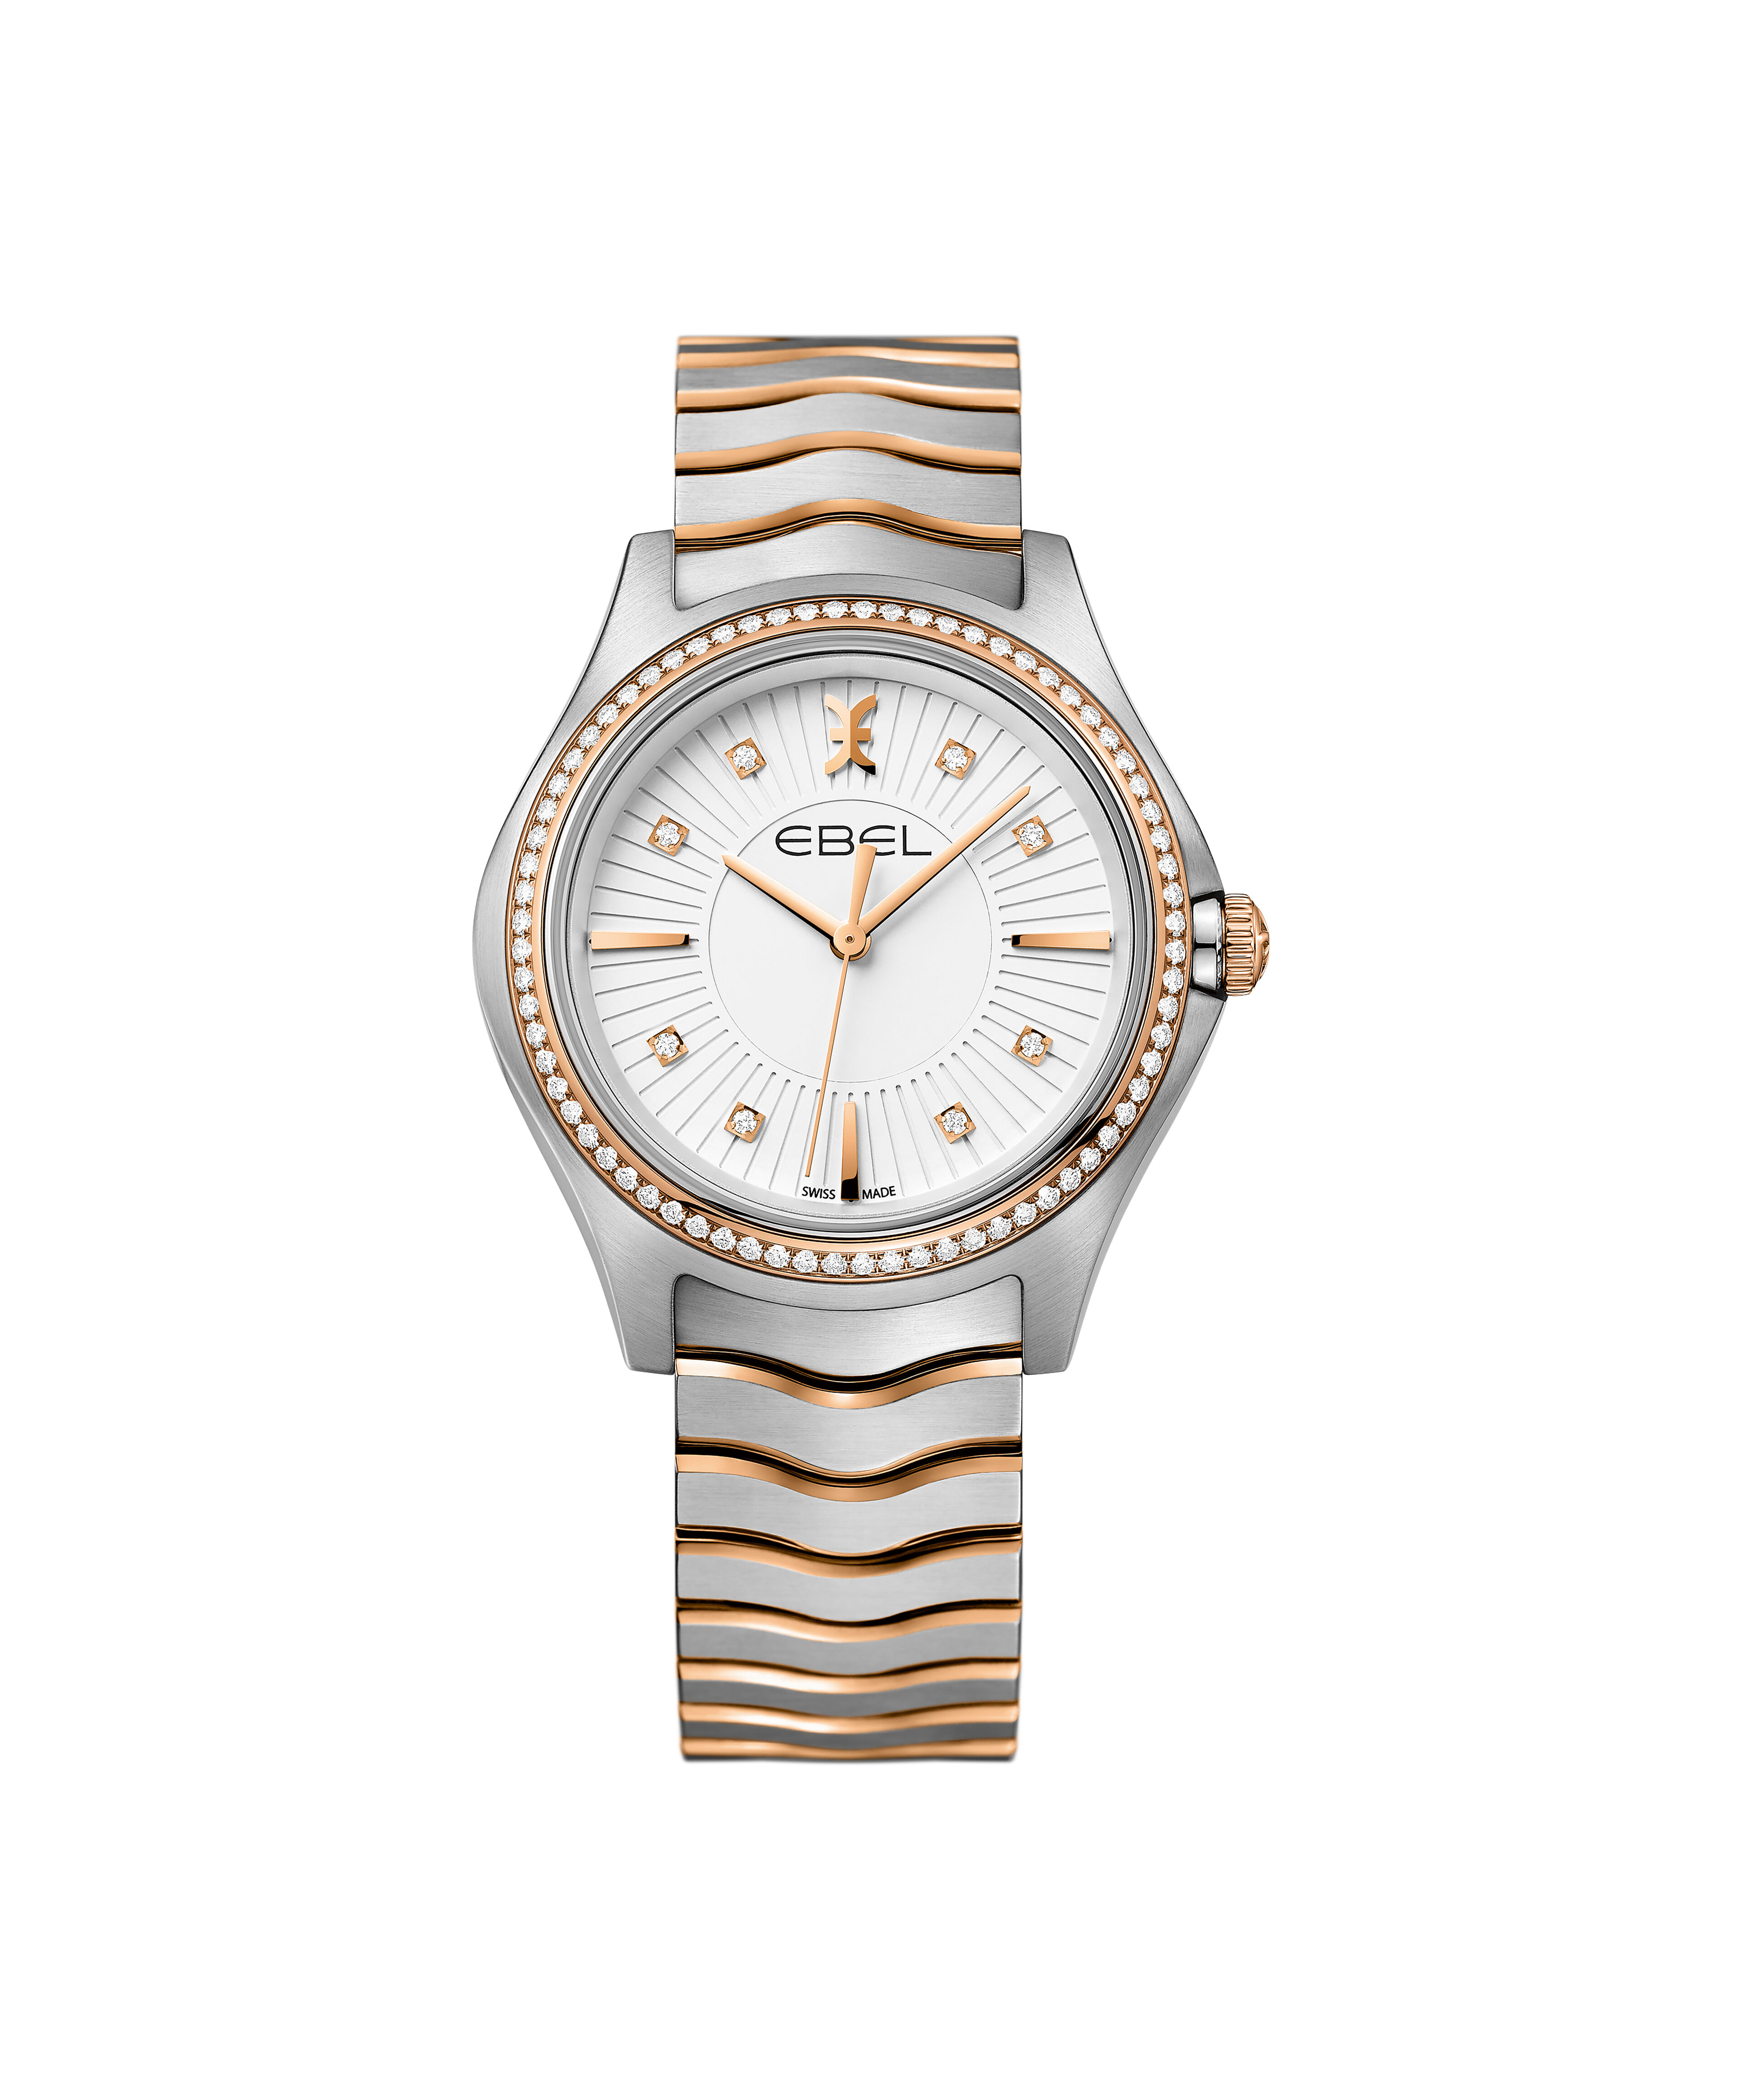 How To Spot Fake Omega Constellation